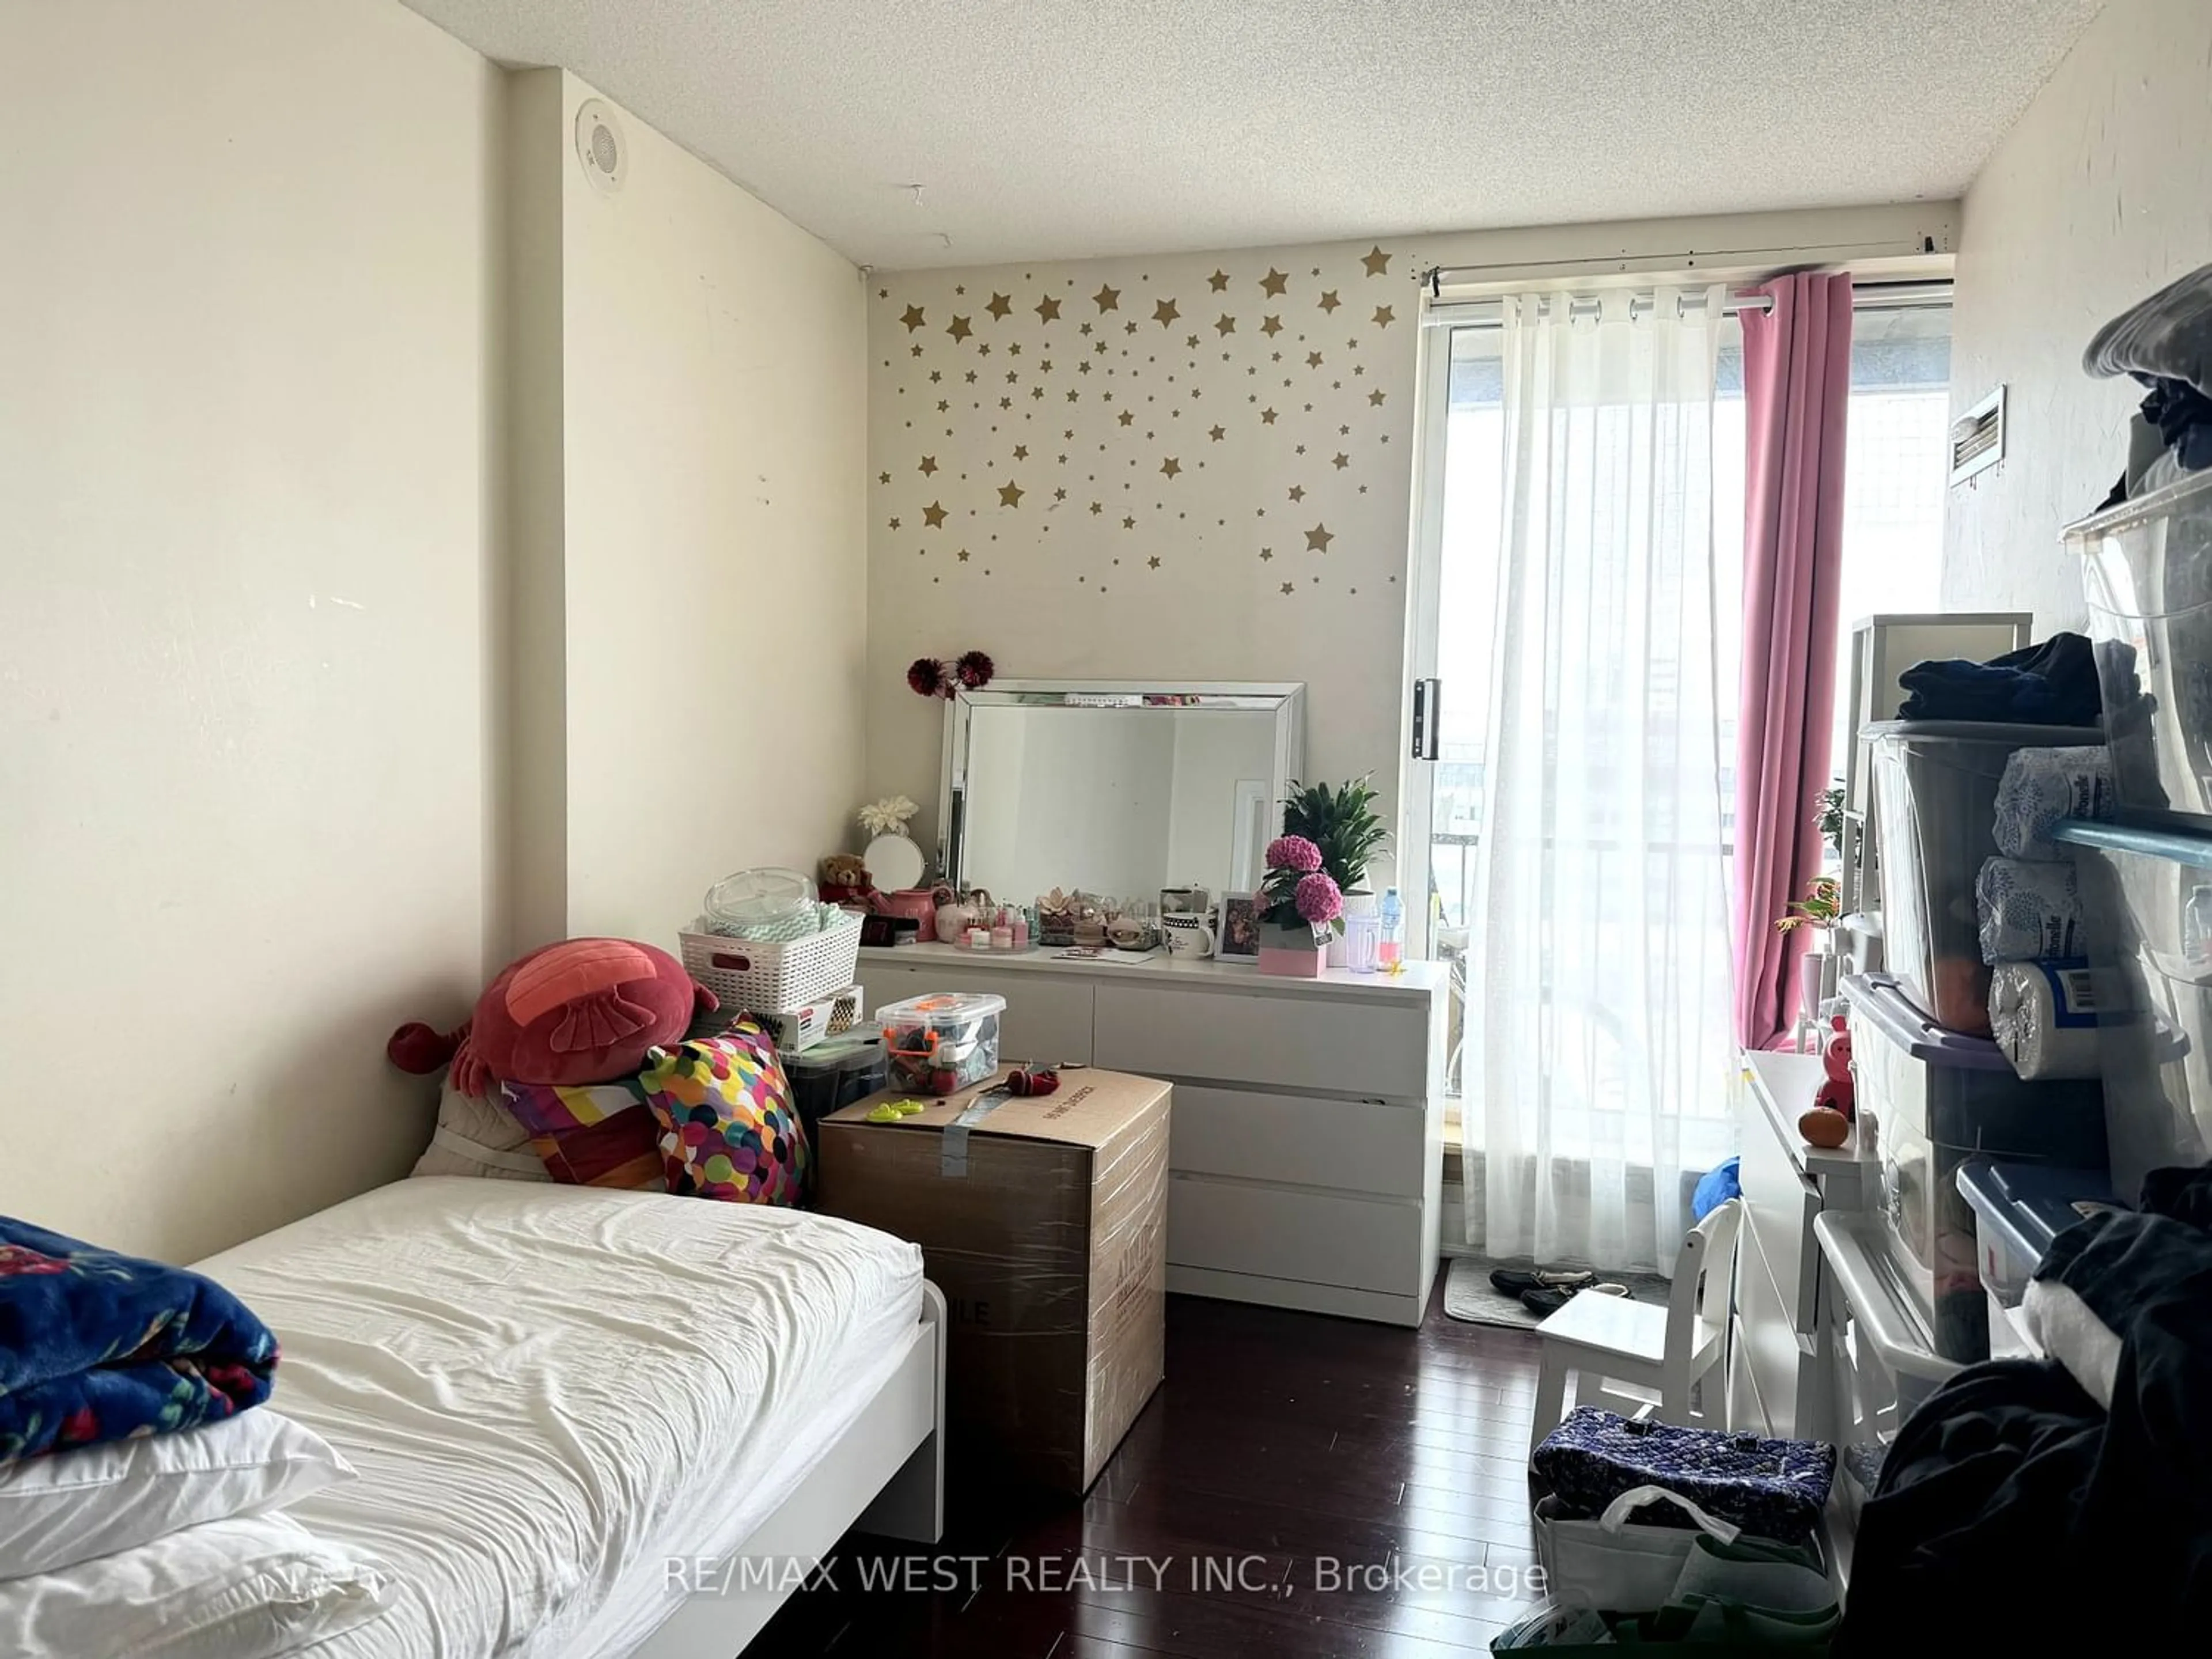 A pic of a room for 2737 Keele St #1005, Toronto Ontario M3M 2E9